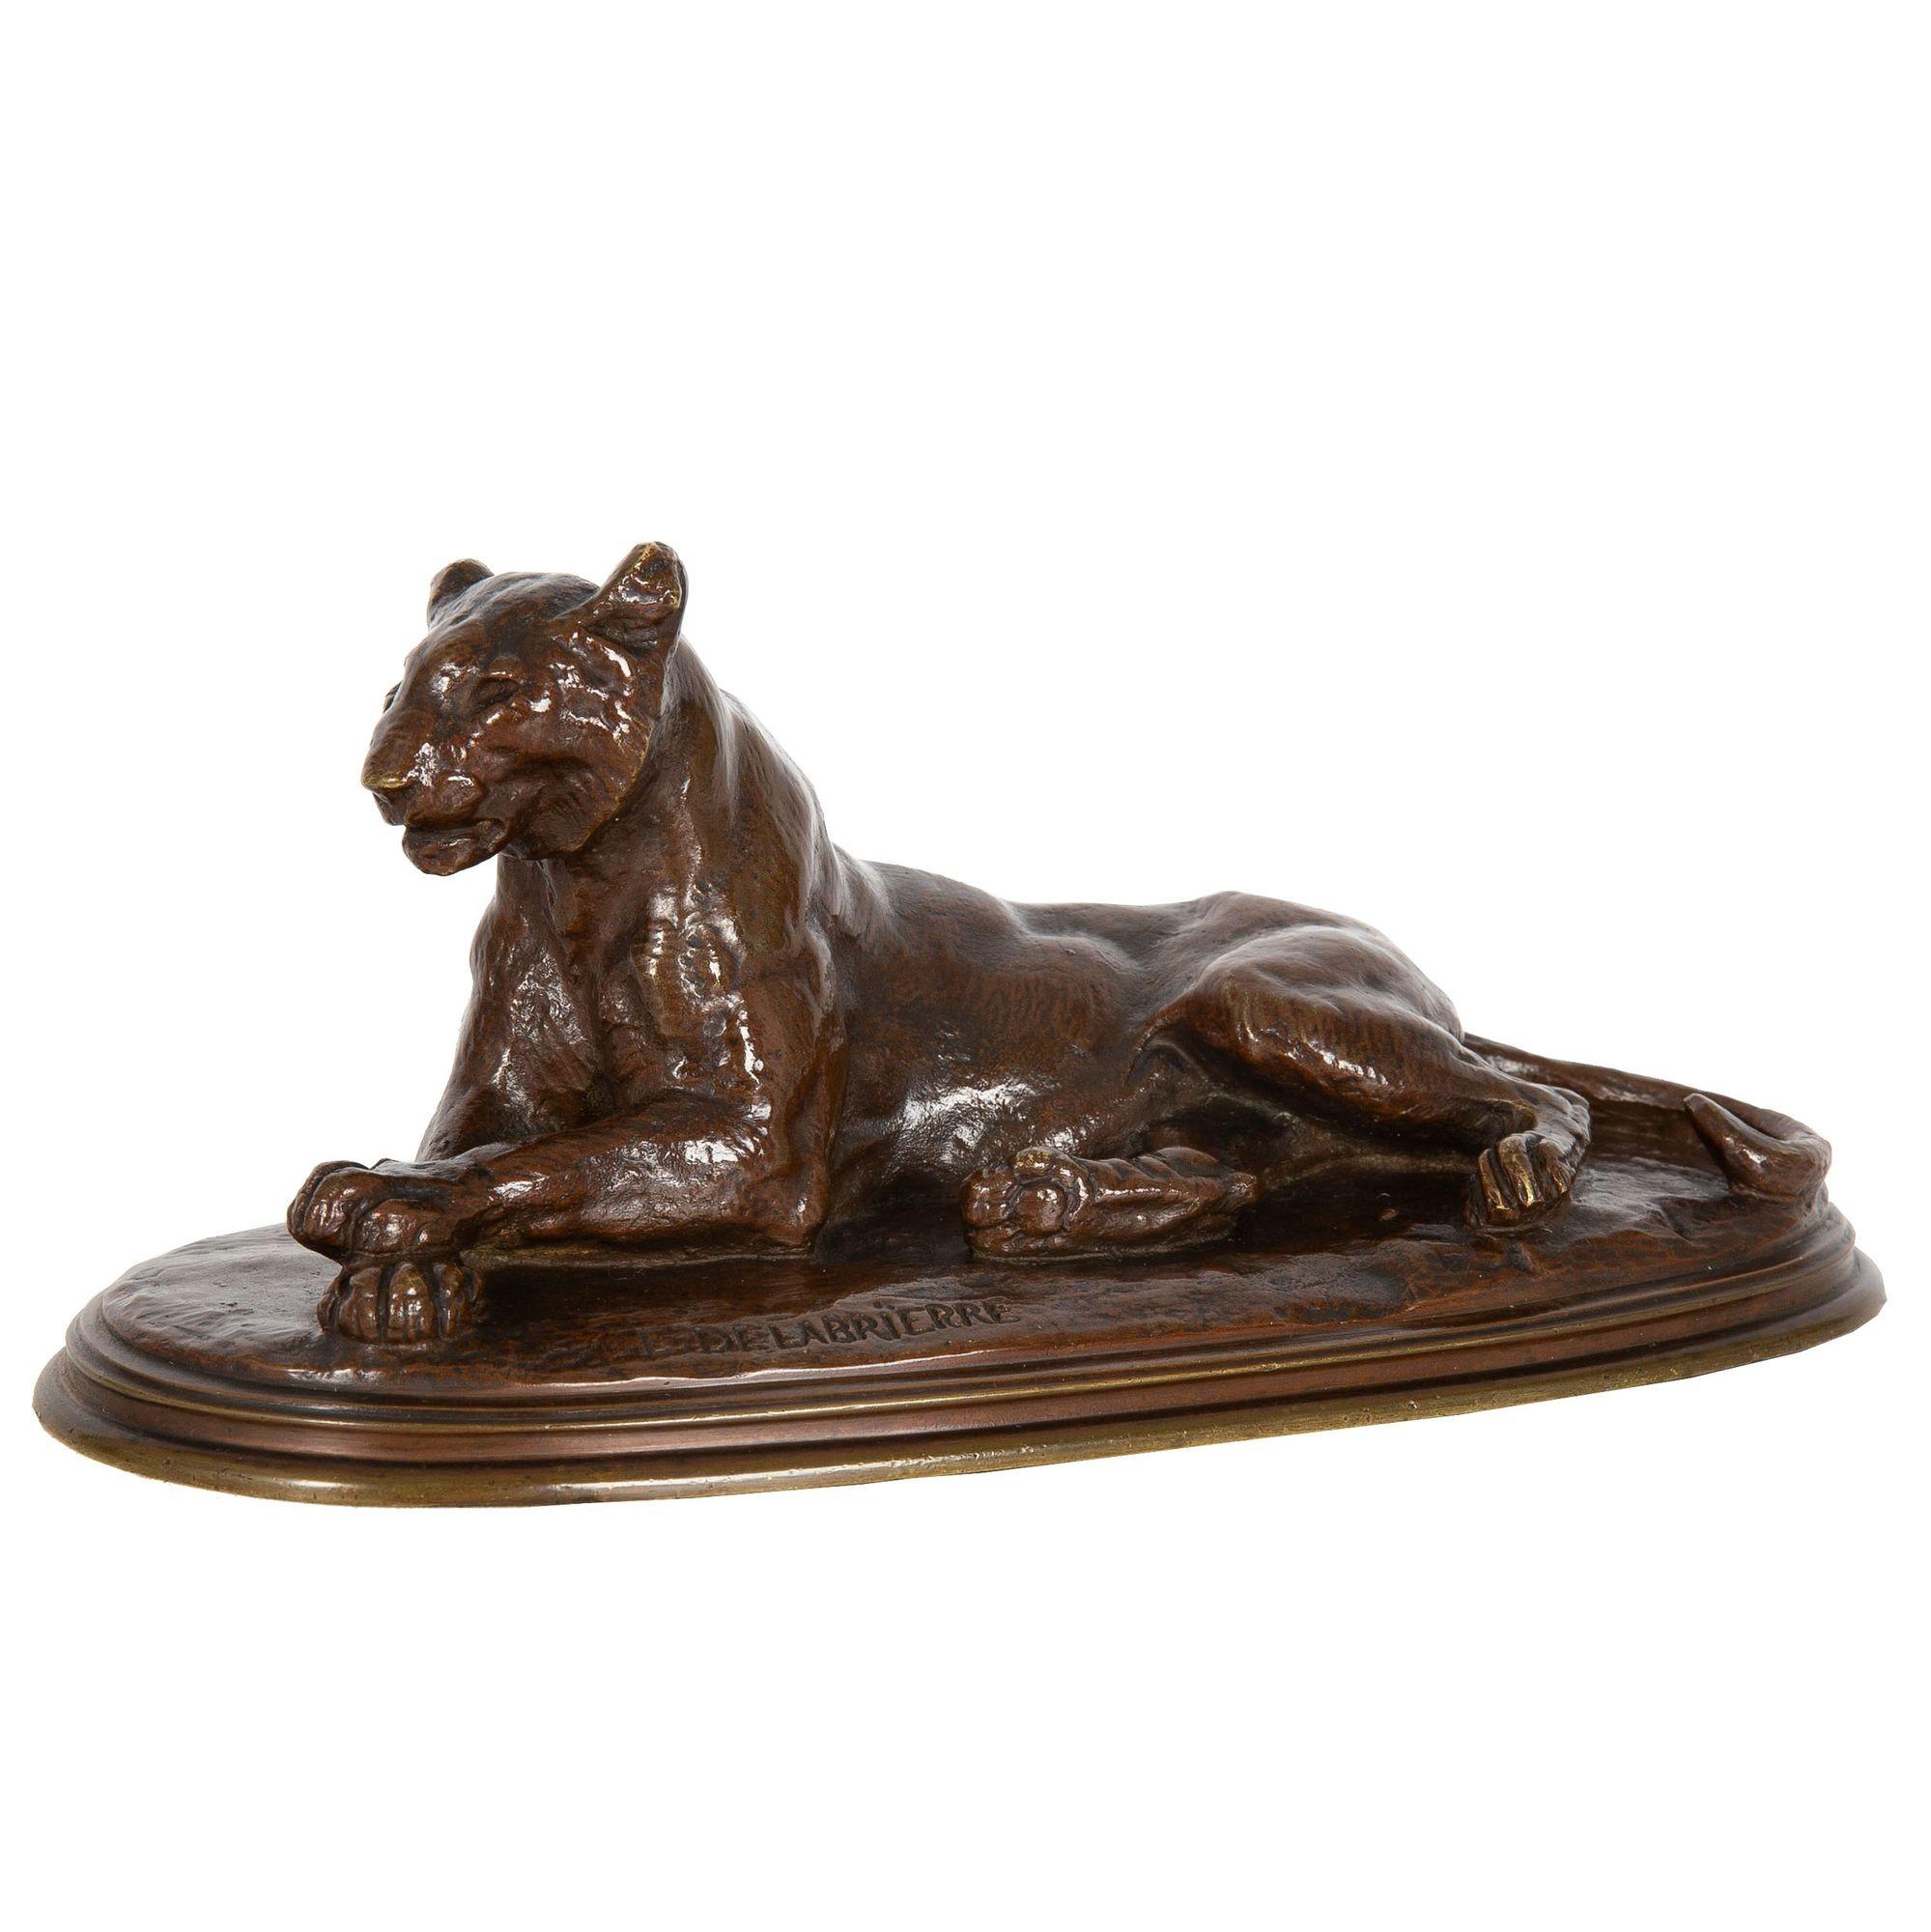 PAUL EDOUARD DELABRIERRE
French, 1829-1912

Tigress at Rest

Sand-cast reddish-brown patinated bronze  Signed in base 